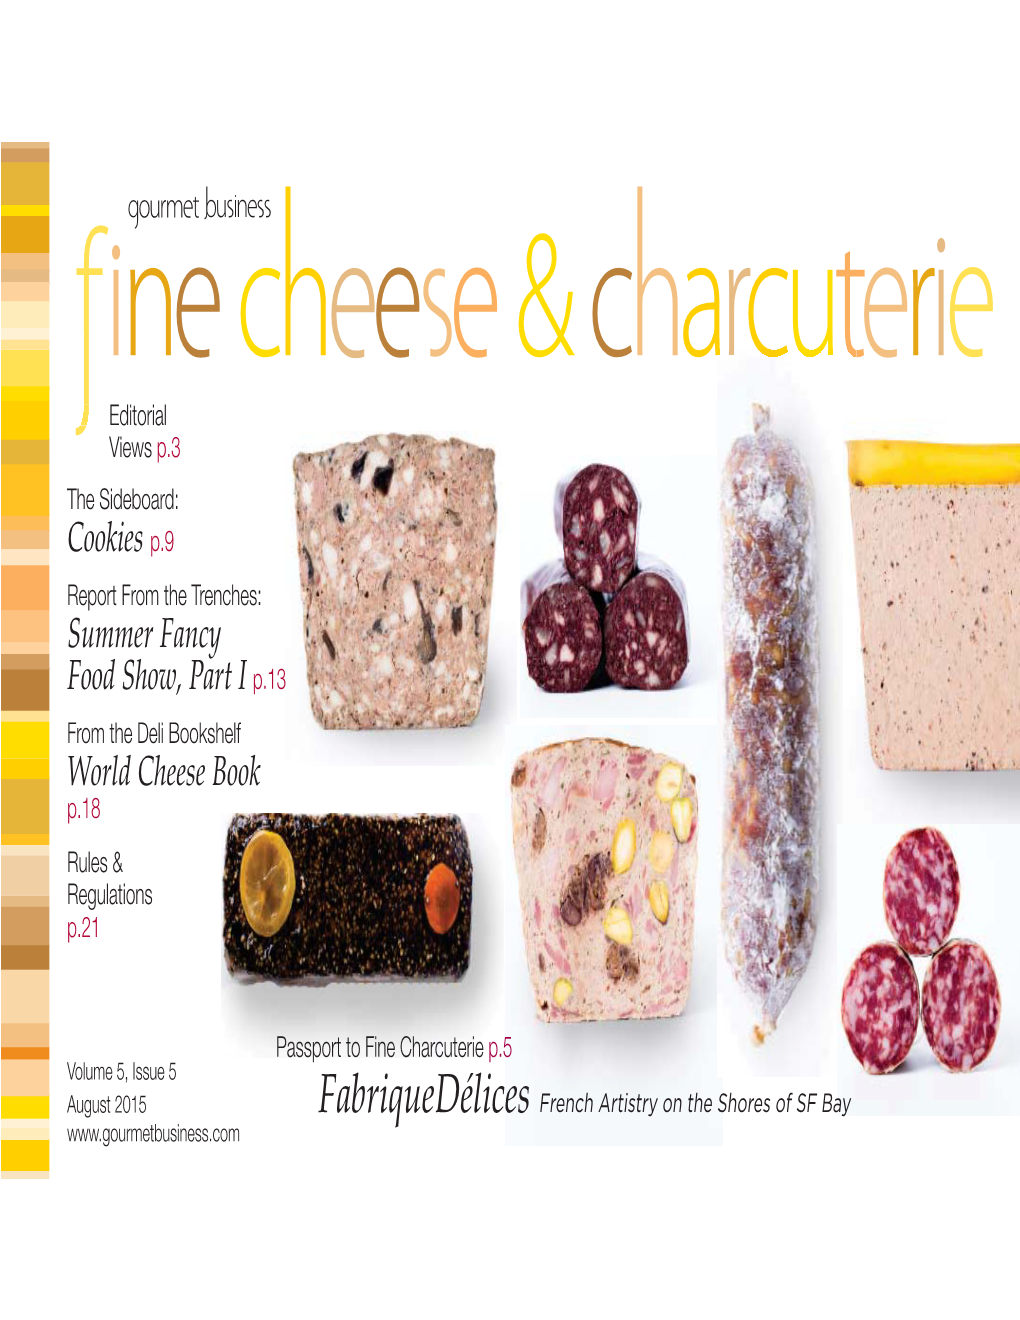 Cookies P.9 Summer Fancy Food Show, Part I P.13 World Cheese Book